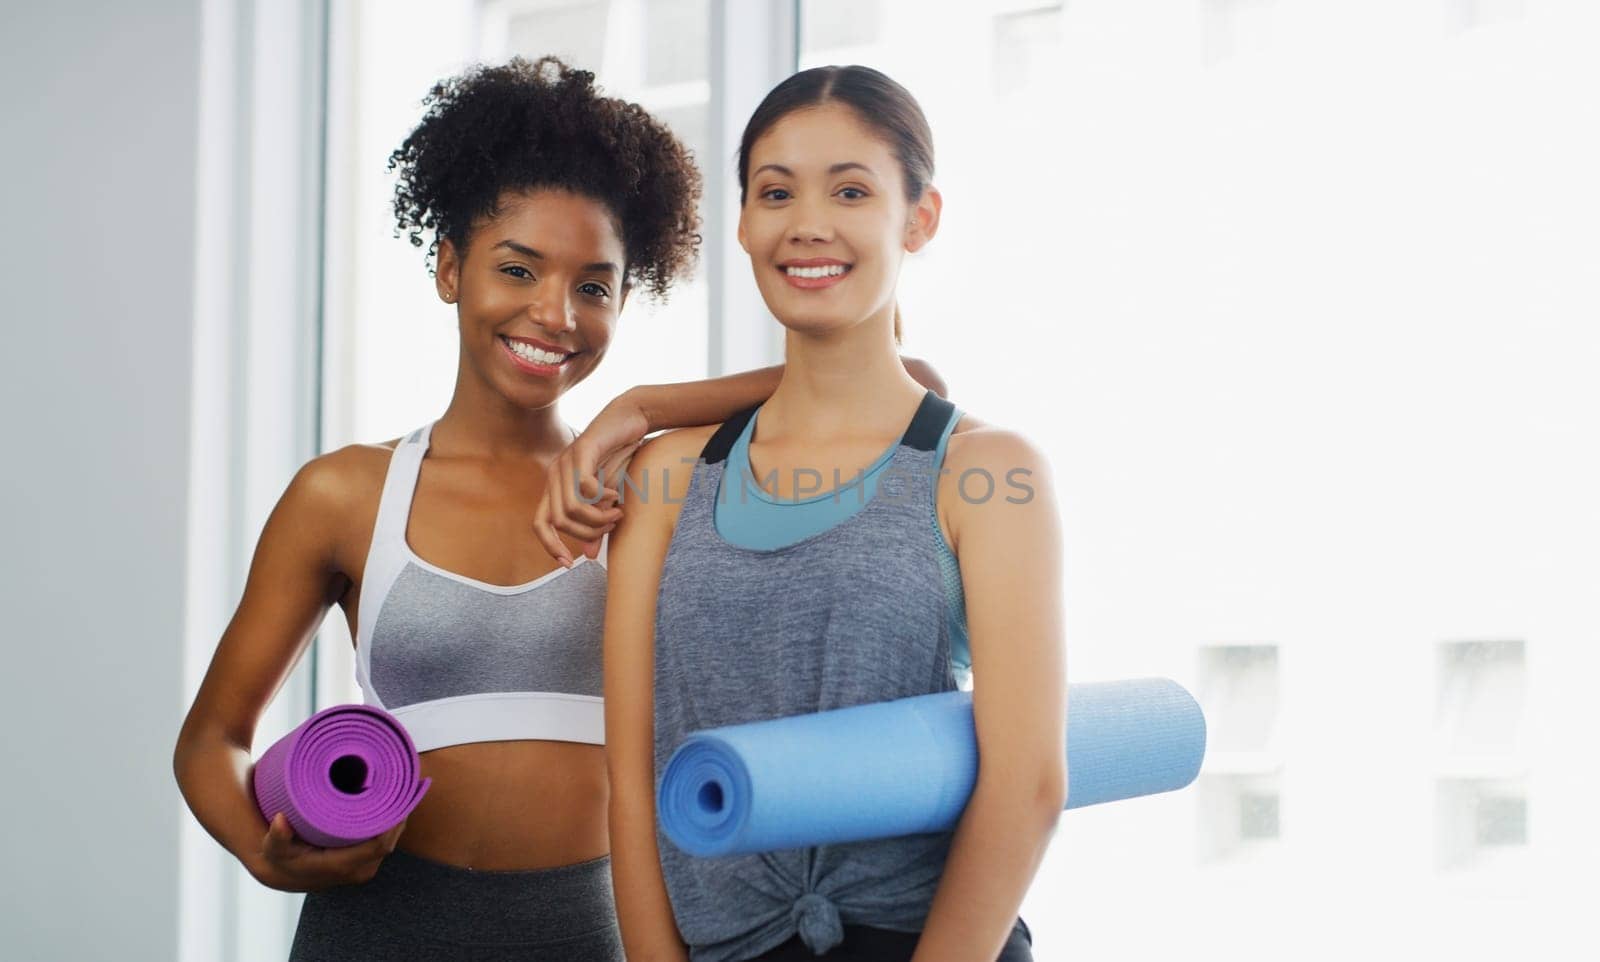 Lets get our yoga on. Cropped portrait of two attractive young women standing and holding yoga mats and posing before working out indoors